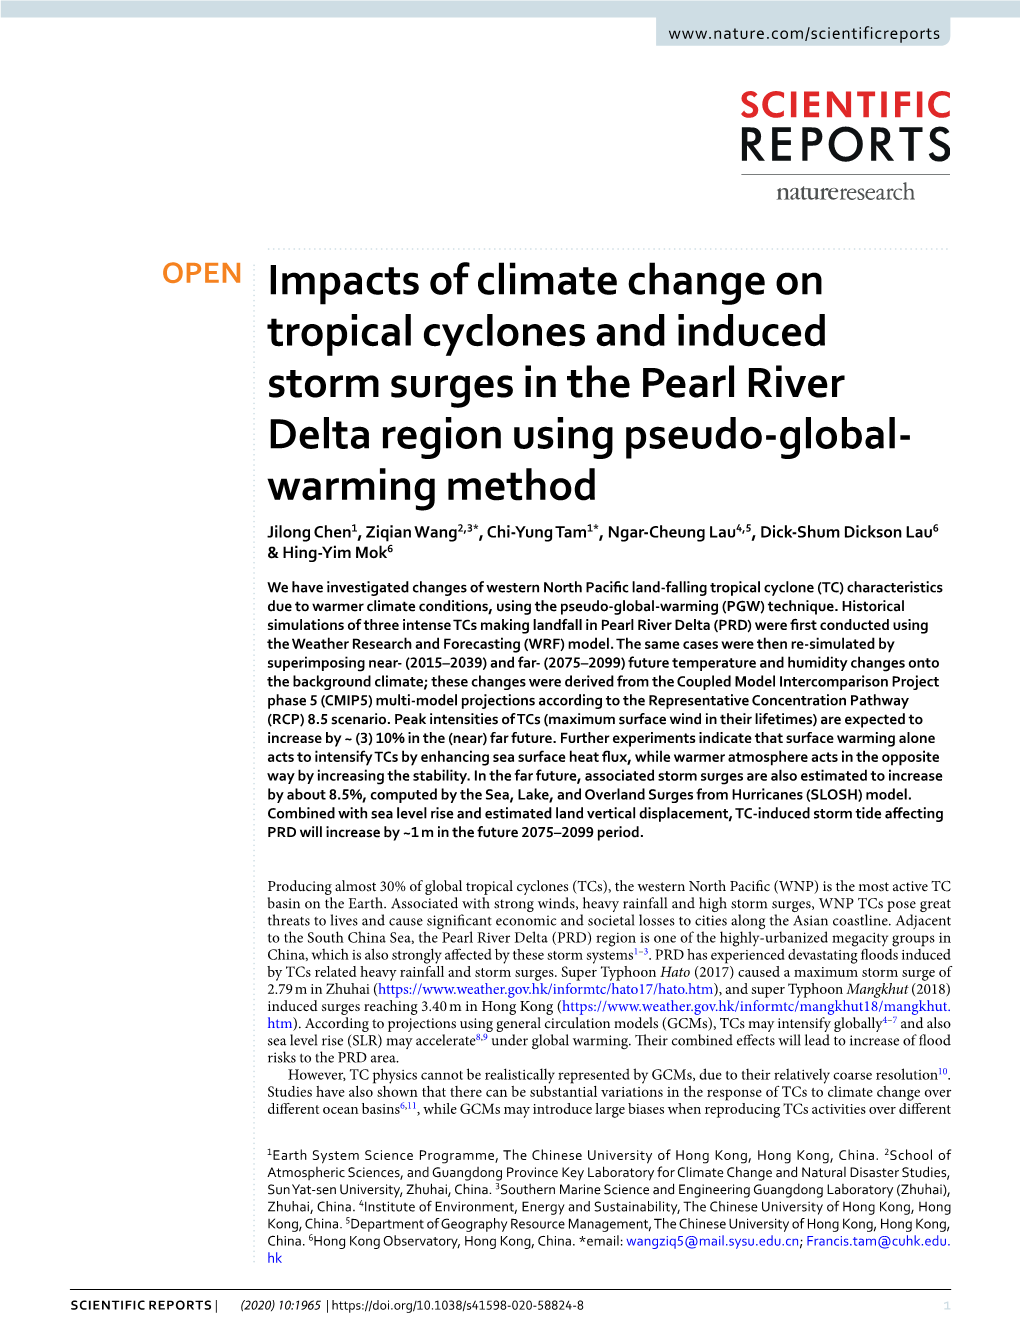 Impacts of Climate Change on Tropical Cyclones and Induced Storm Surges